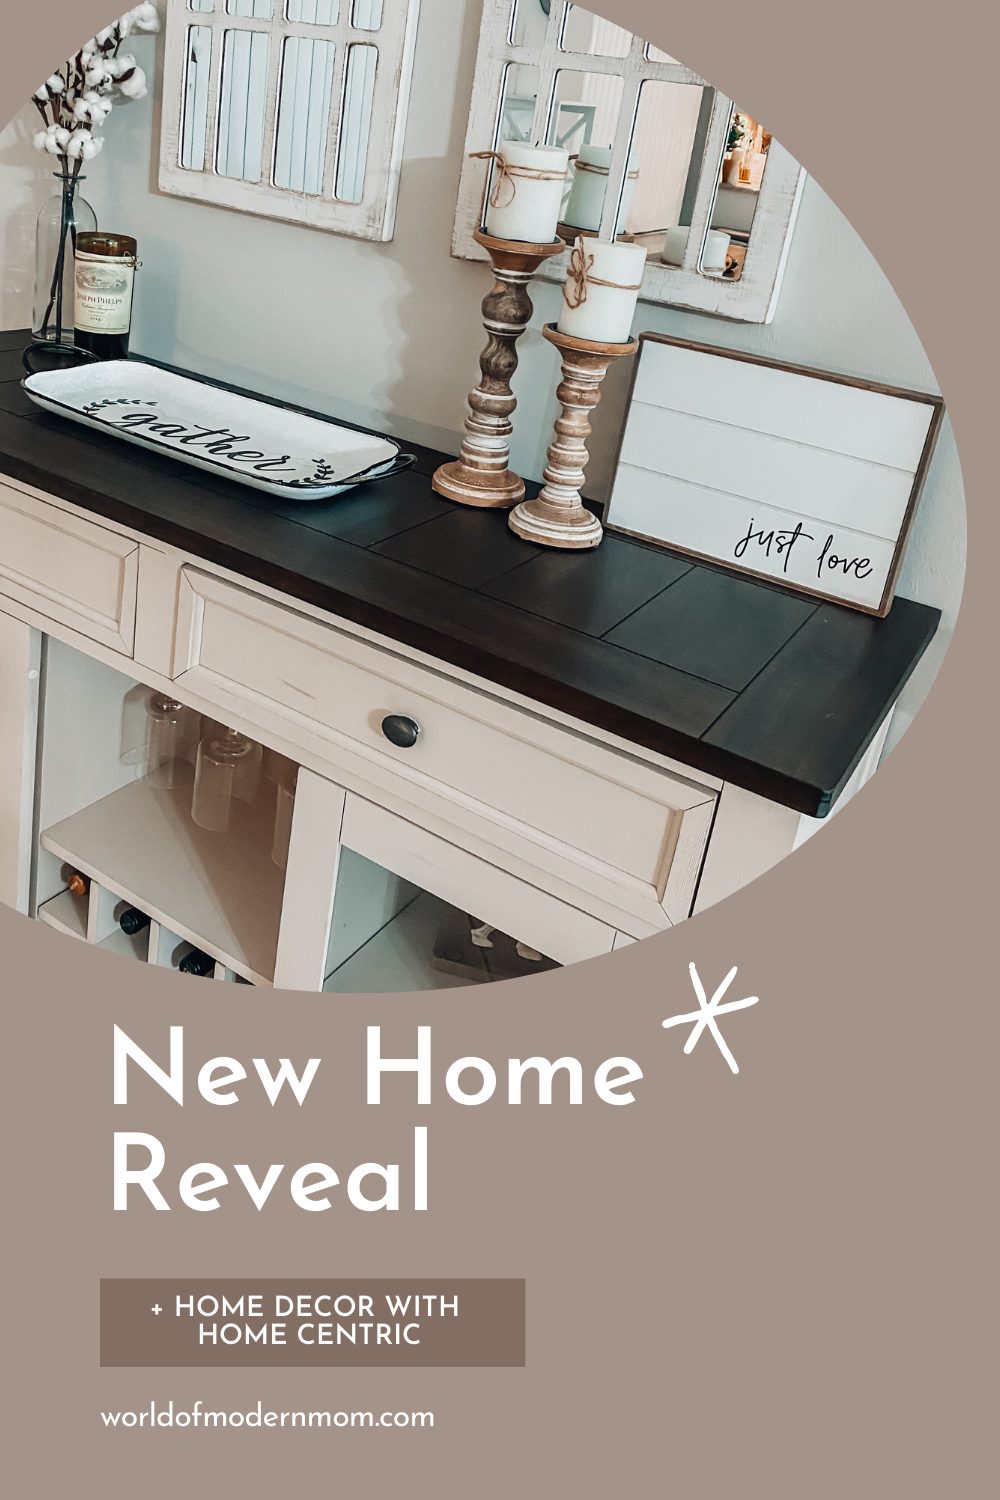 Our New Home Reveal - Home Decor Ideas from Home Centric